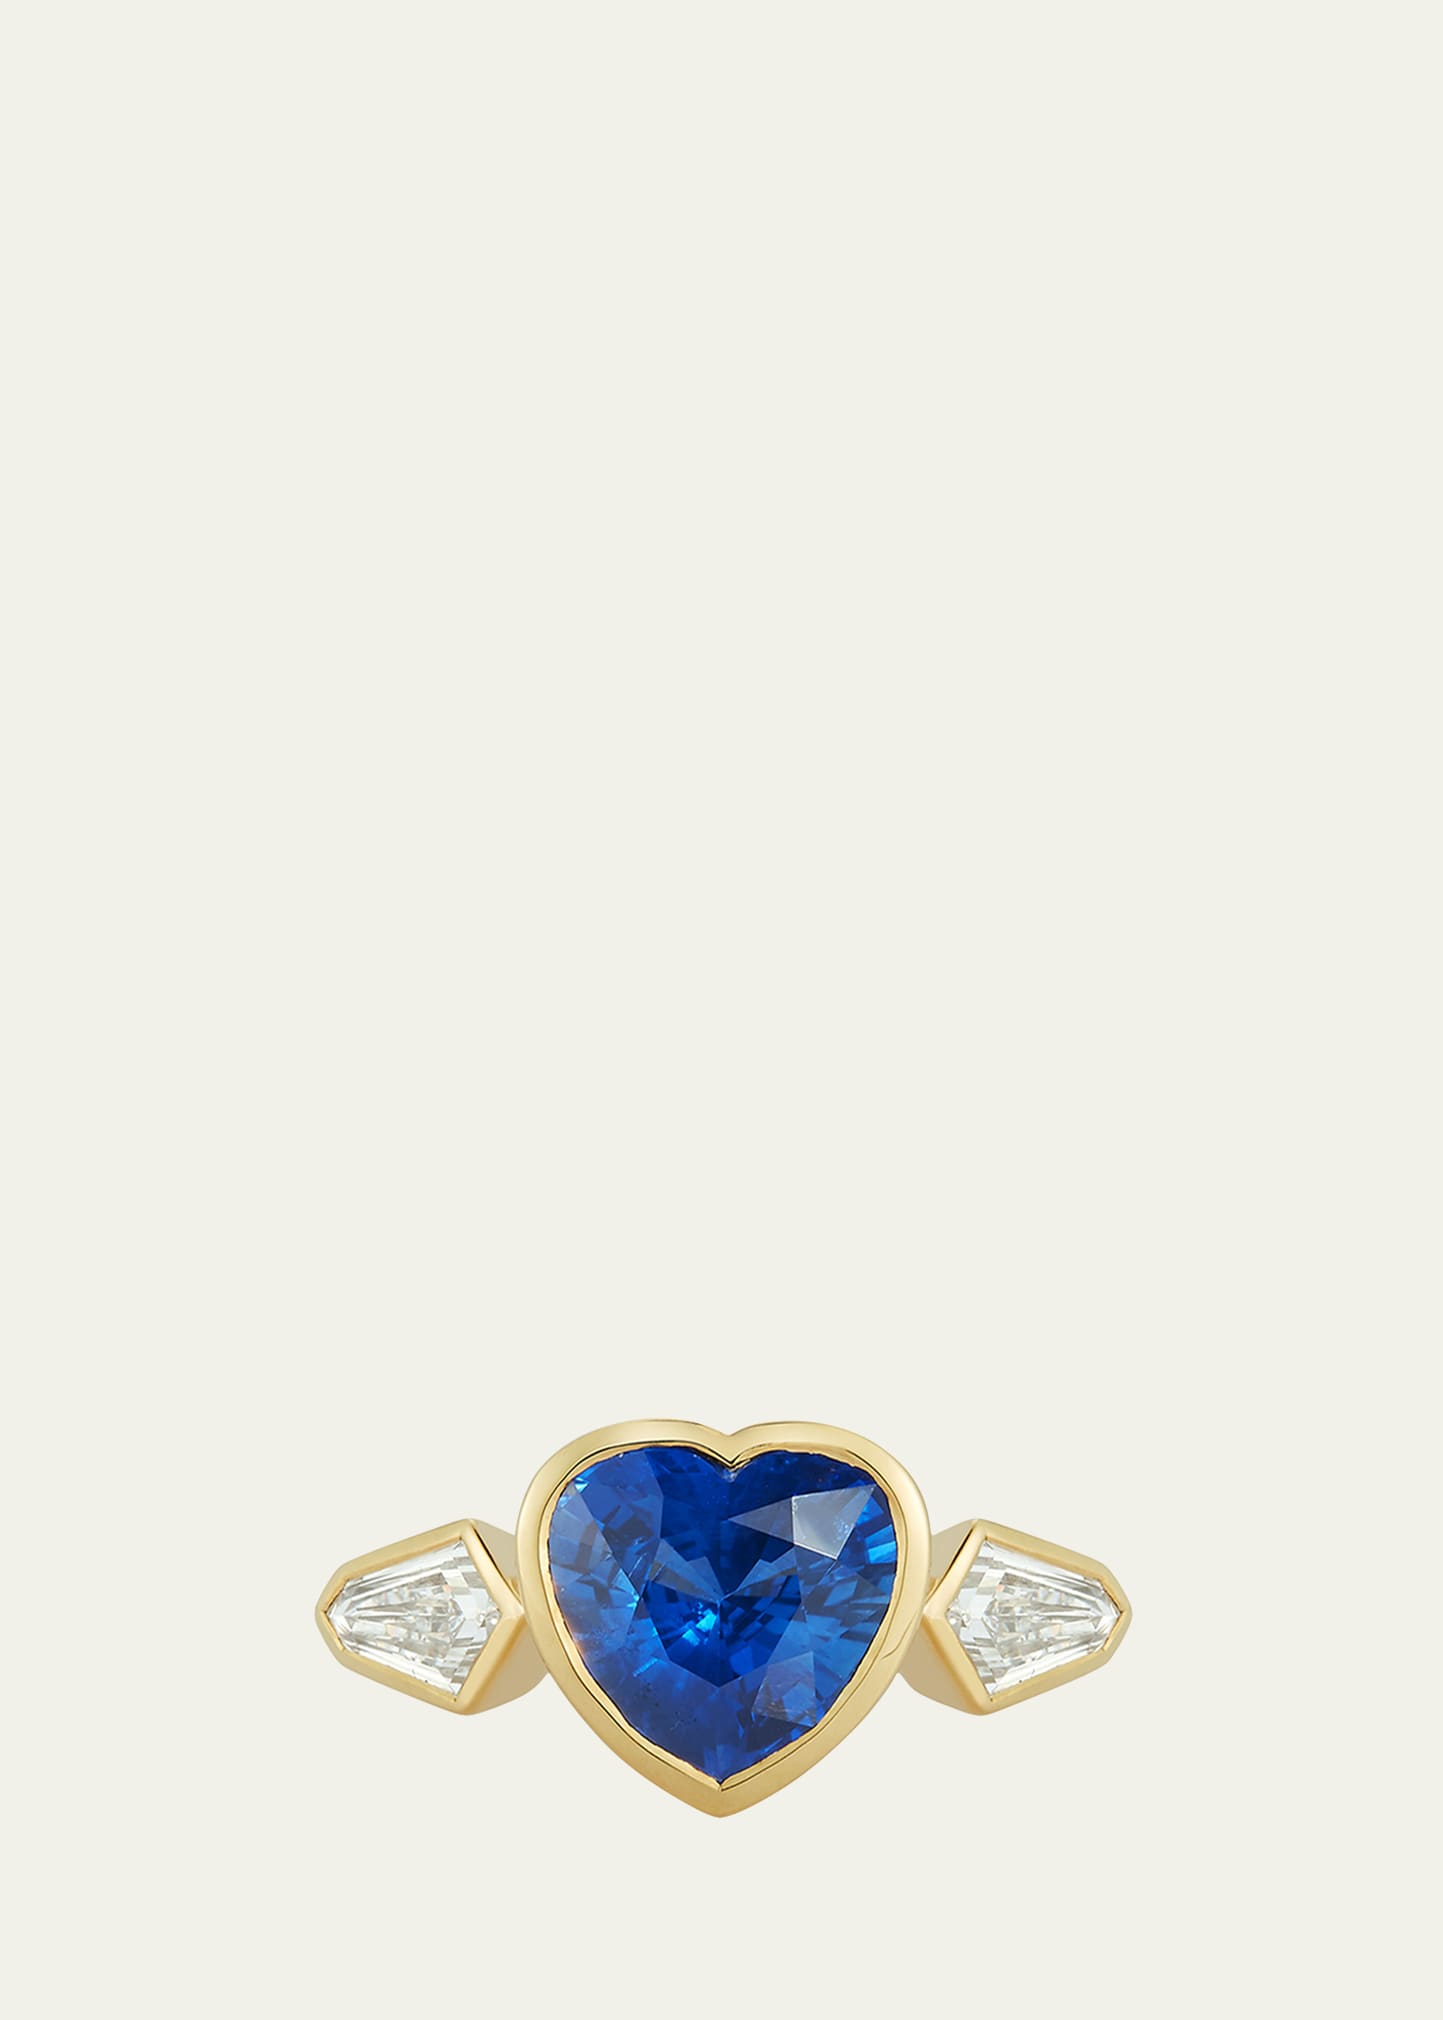 Jemma Wynne One-of-a-Kind Blue Sapphire Heart and Diamond Autumn Ring